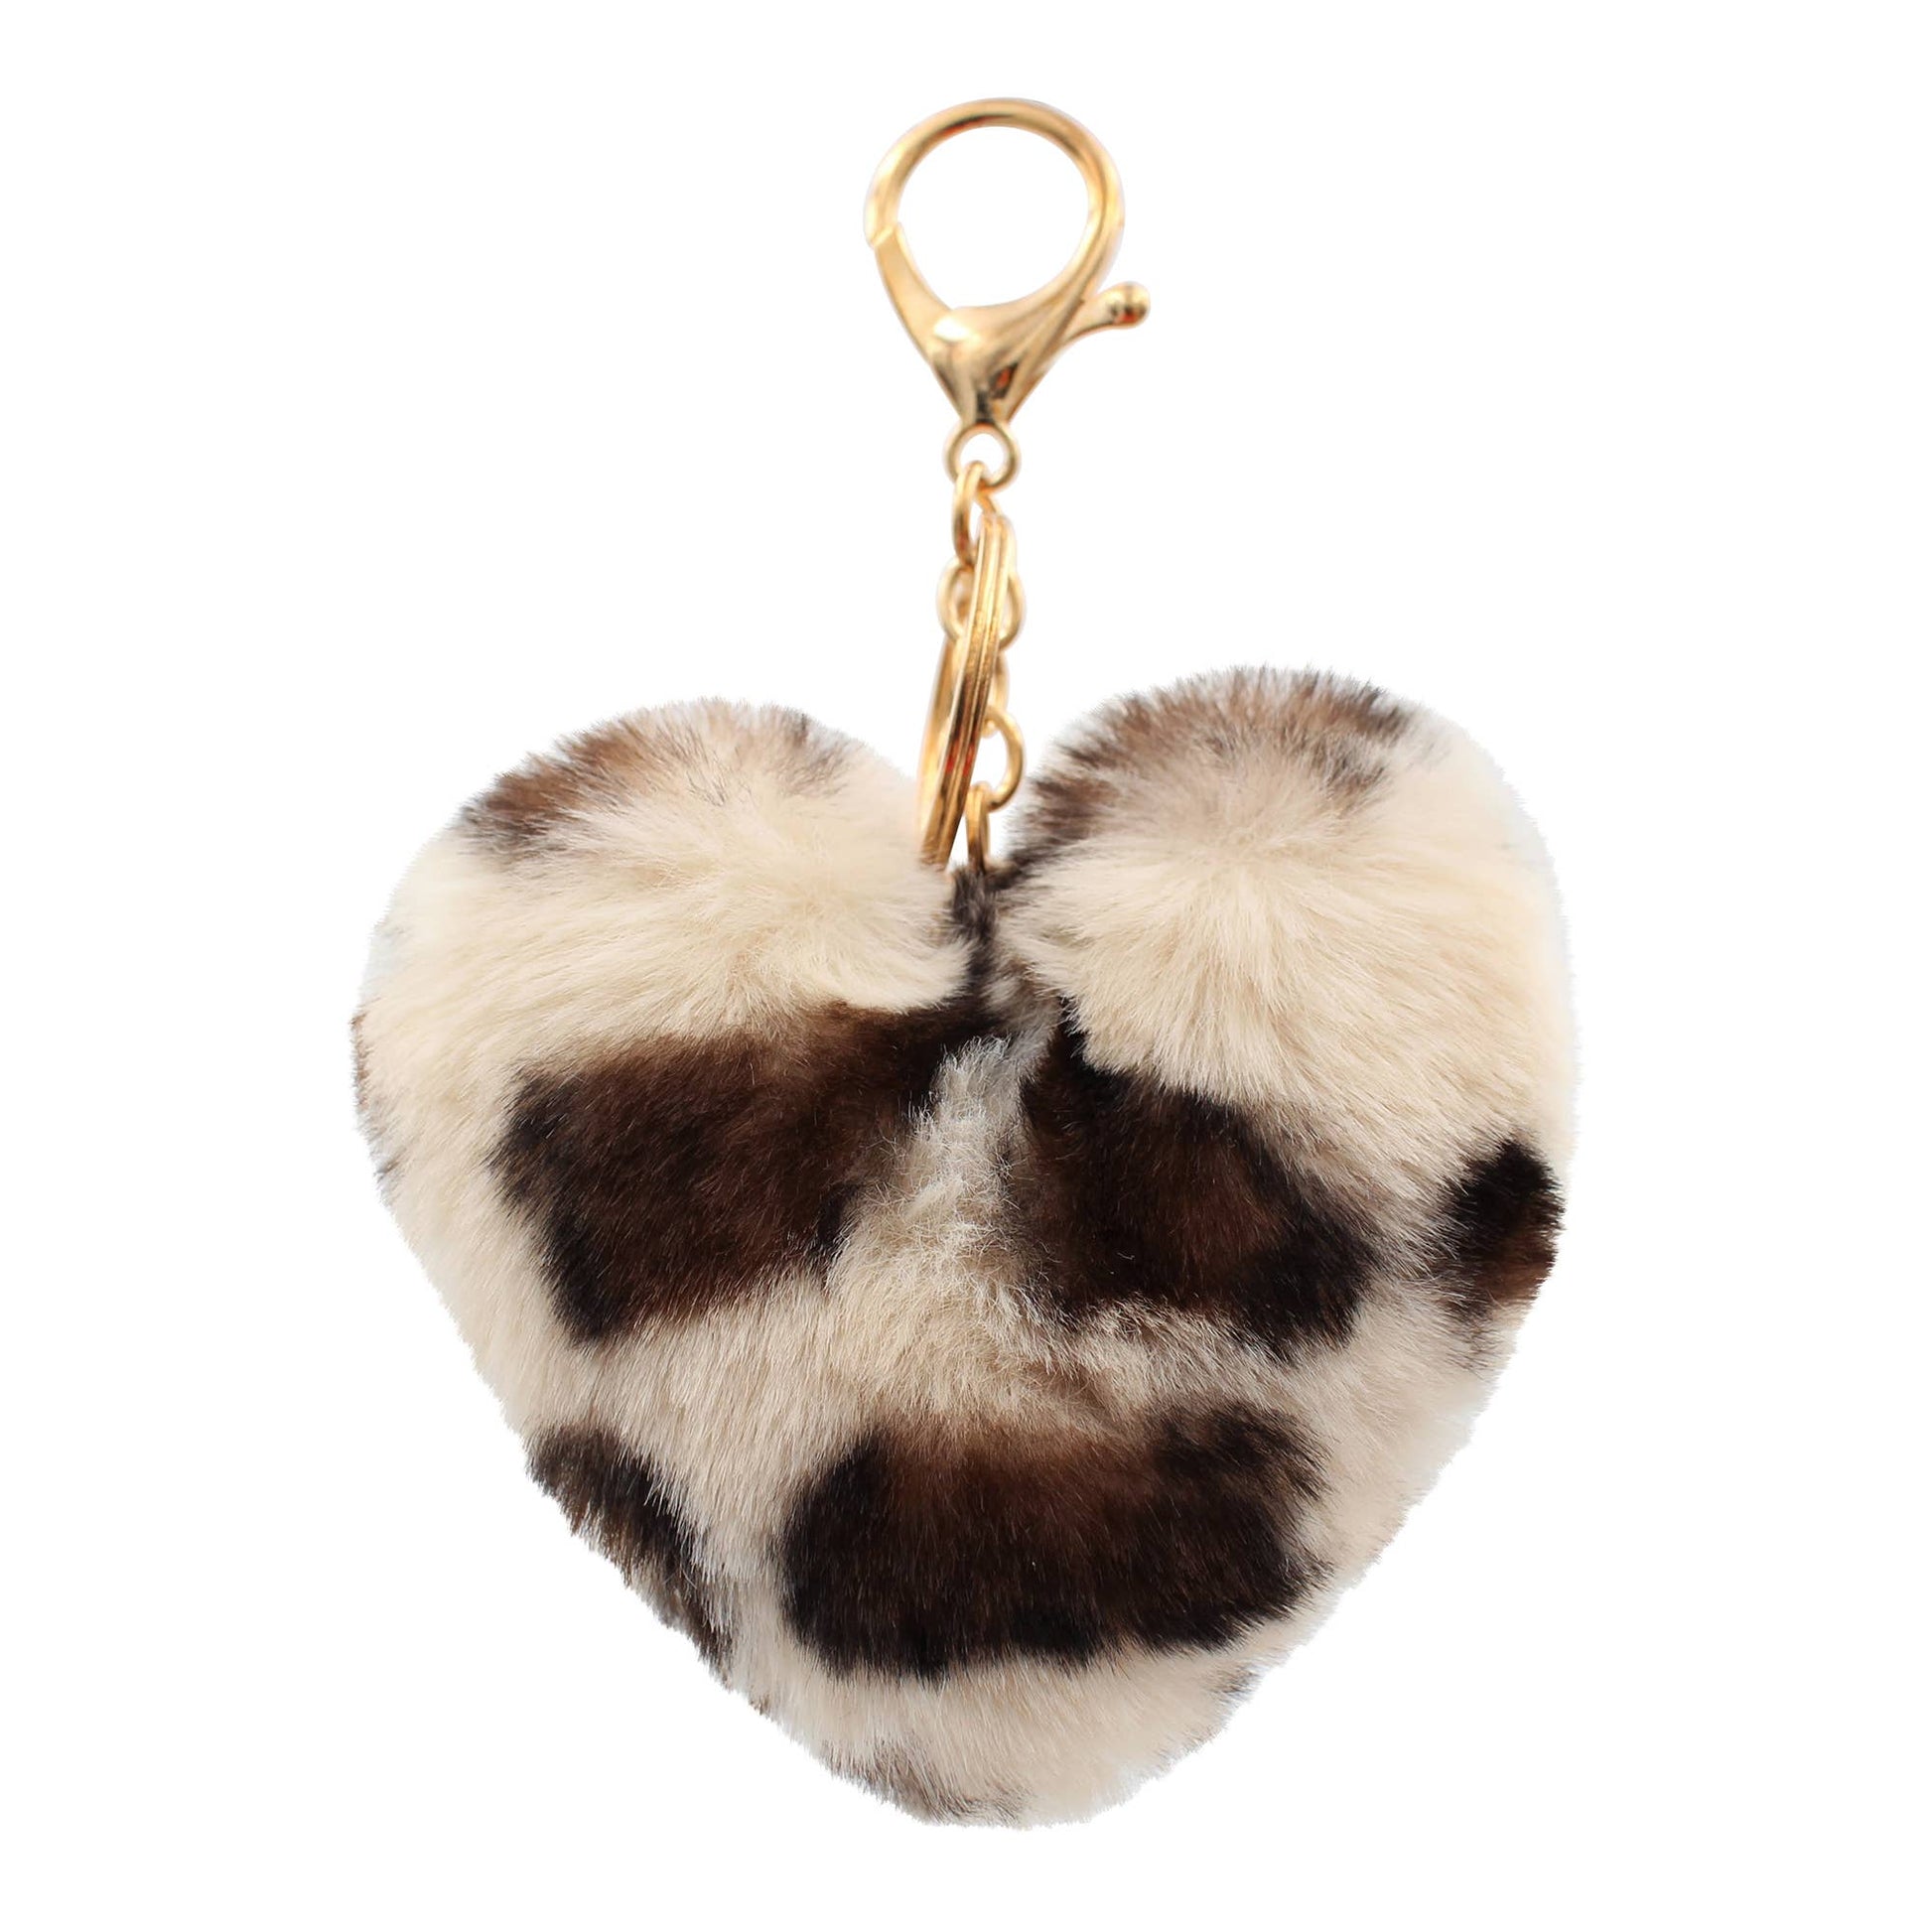 Image of Real Sic Snow Leopard Pom Pom Fuzzy  Heart Key Chain for girl's bag and purse